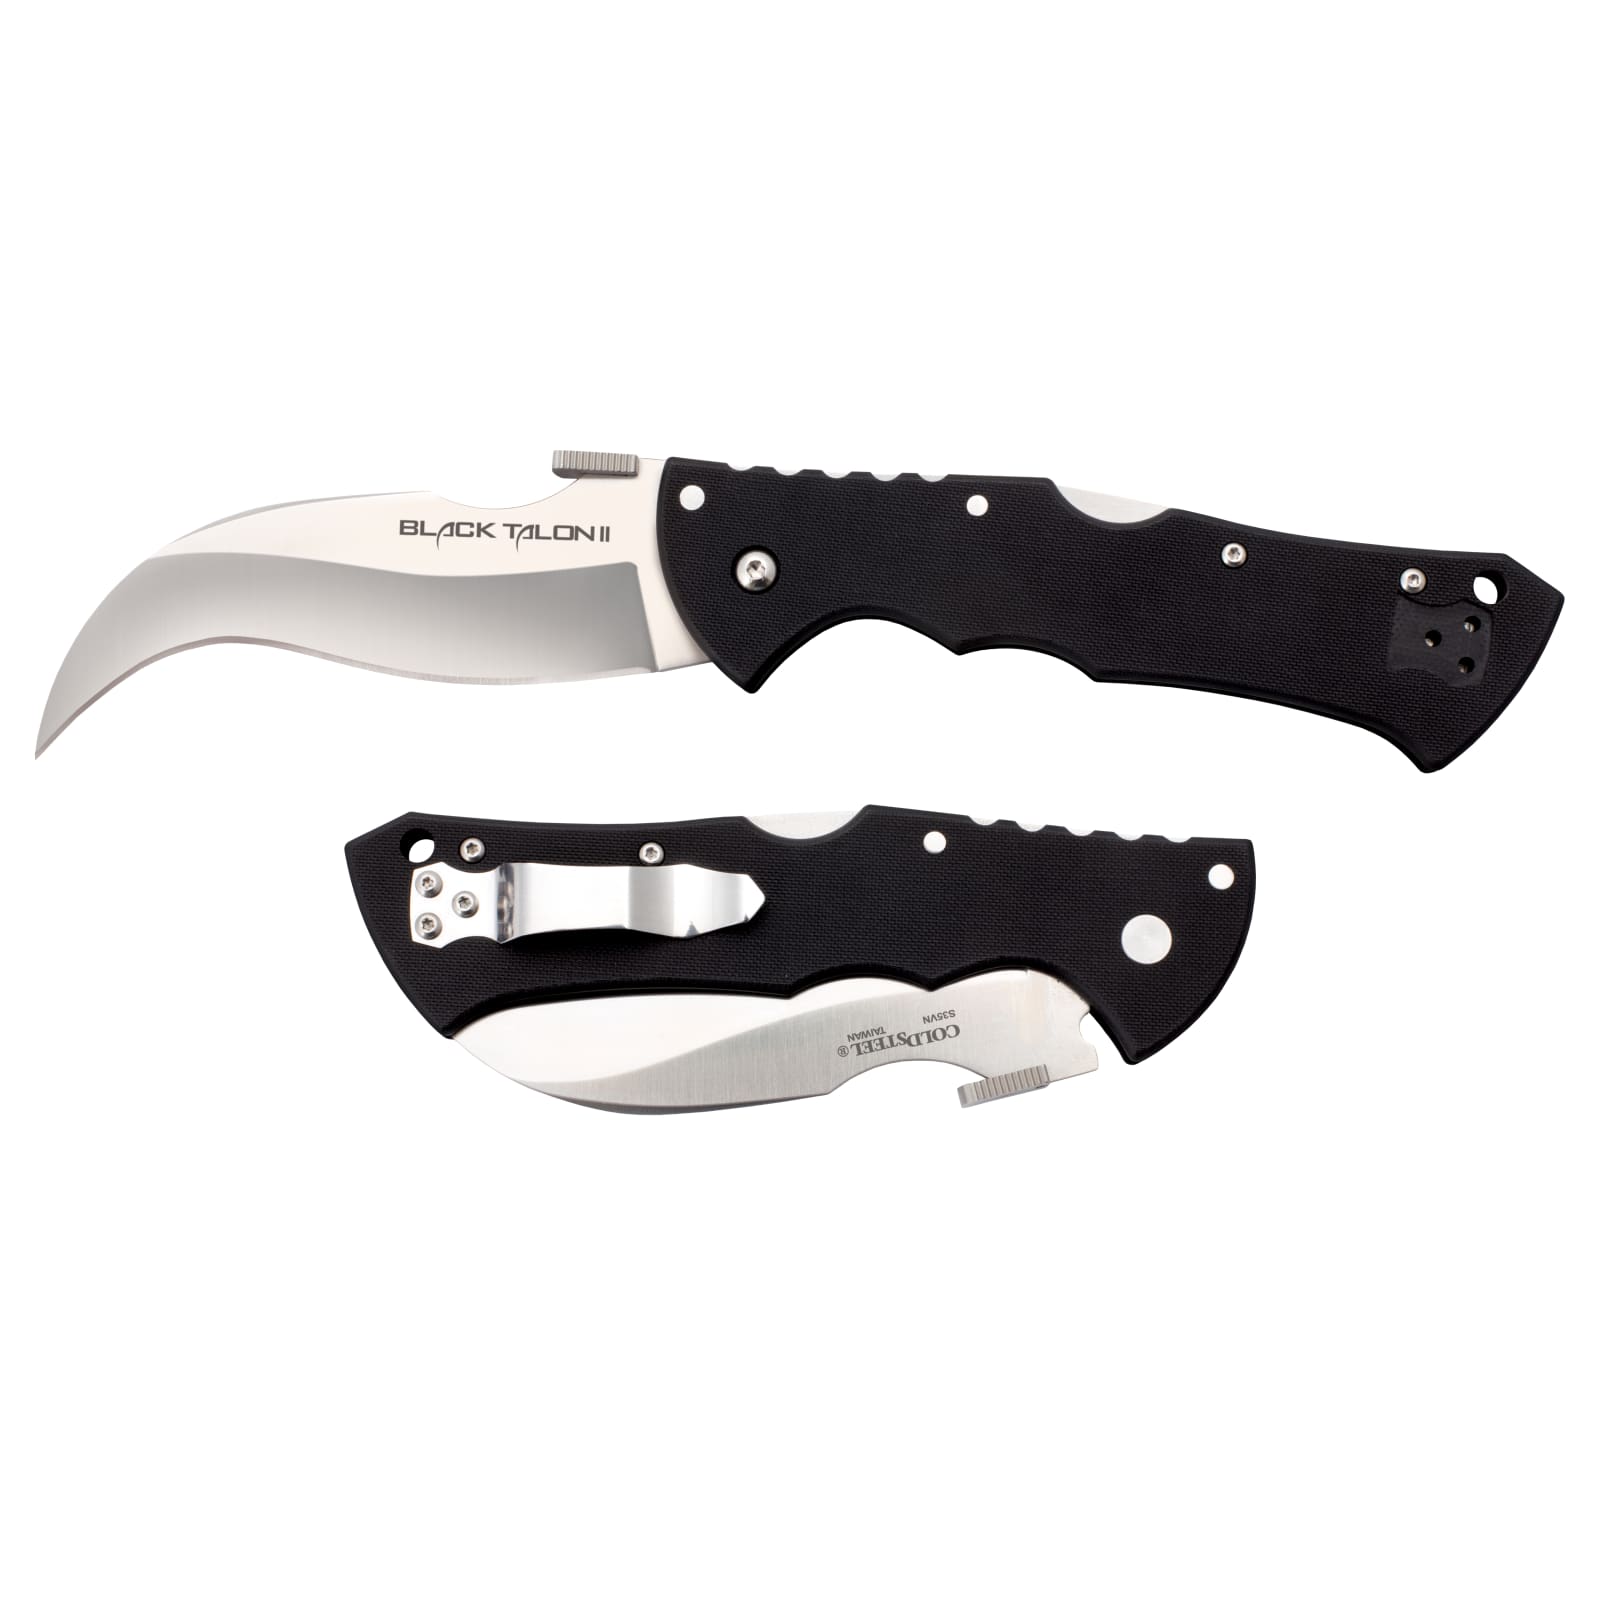 Leatherneck Tanto Knife by Cold Steel at Fleet Farm